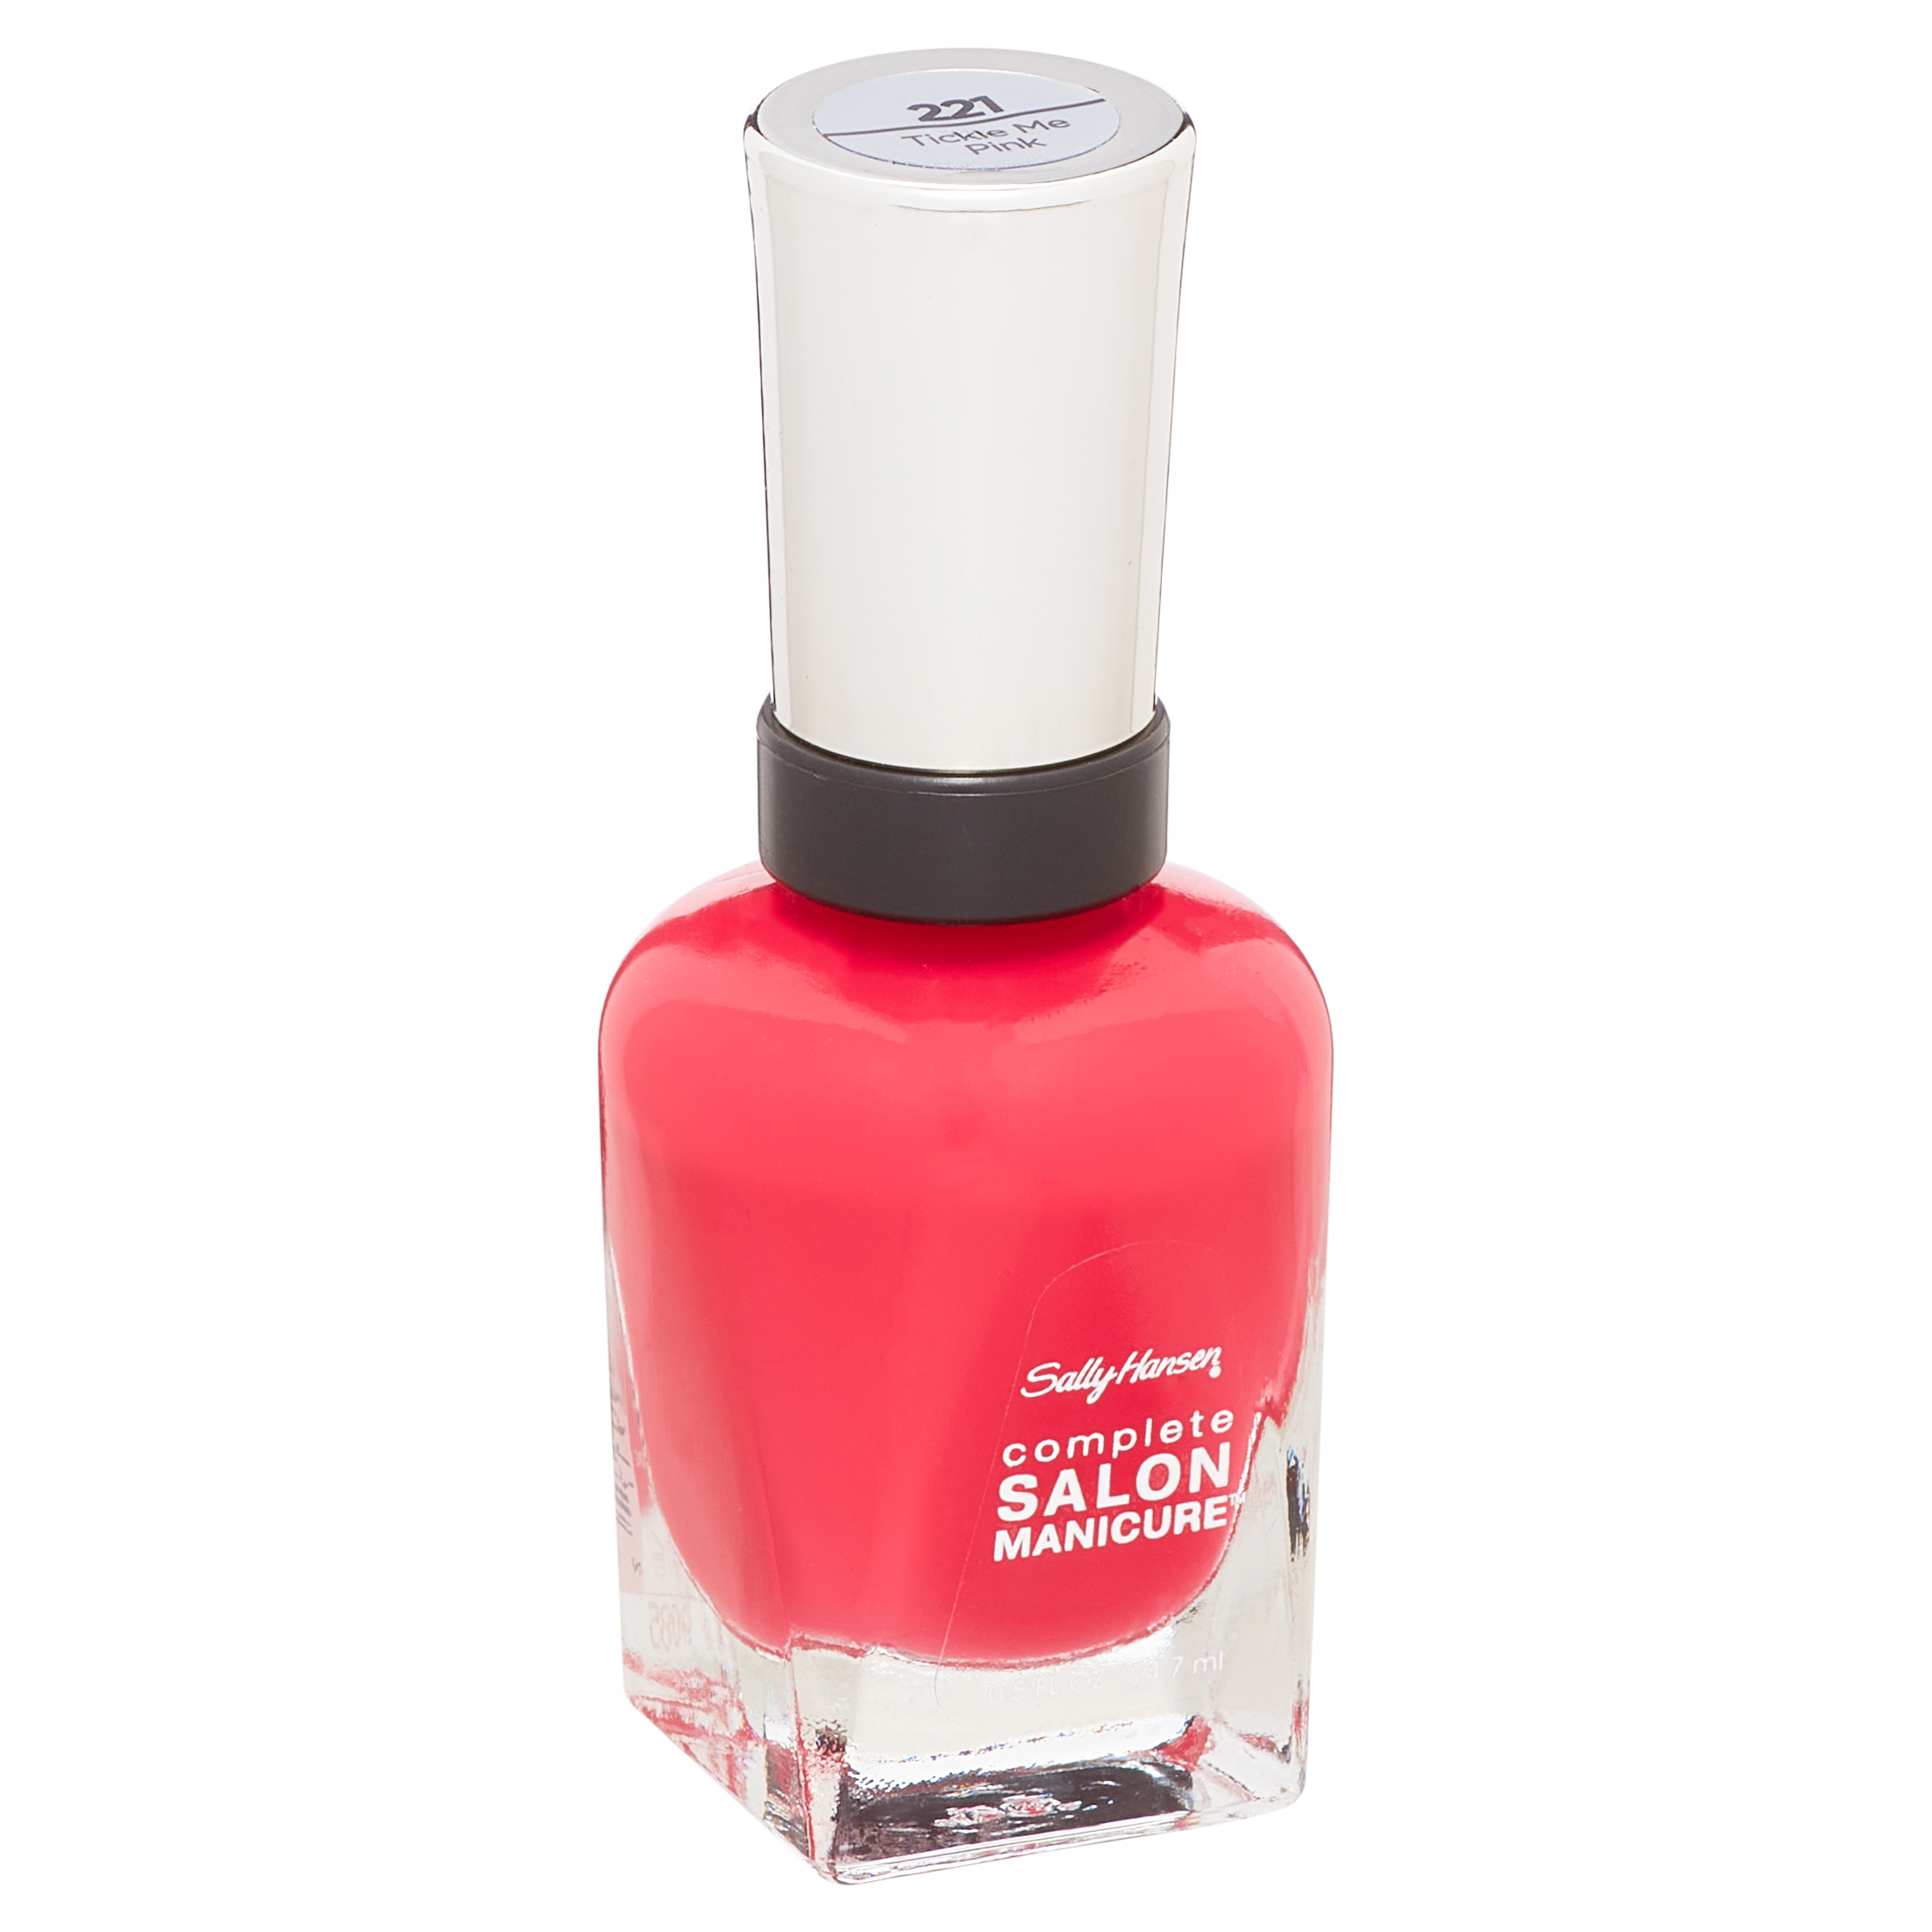 Sally Hansen Complete Salon Manicure Nail Color, Tickle Me Pink - image 6 of 15